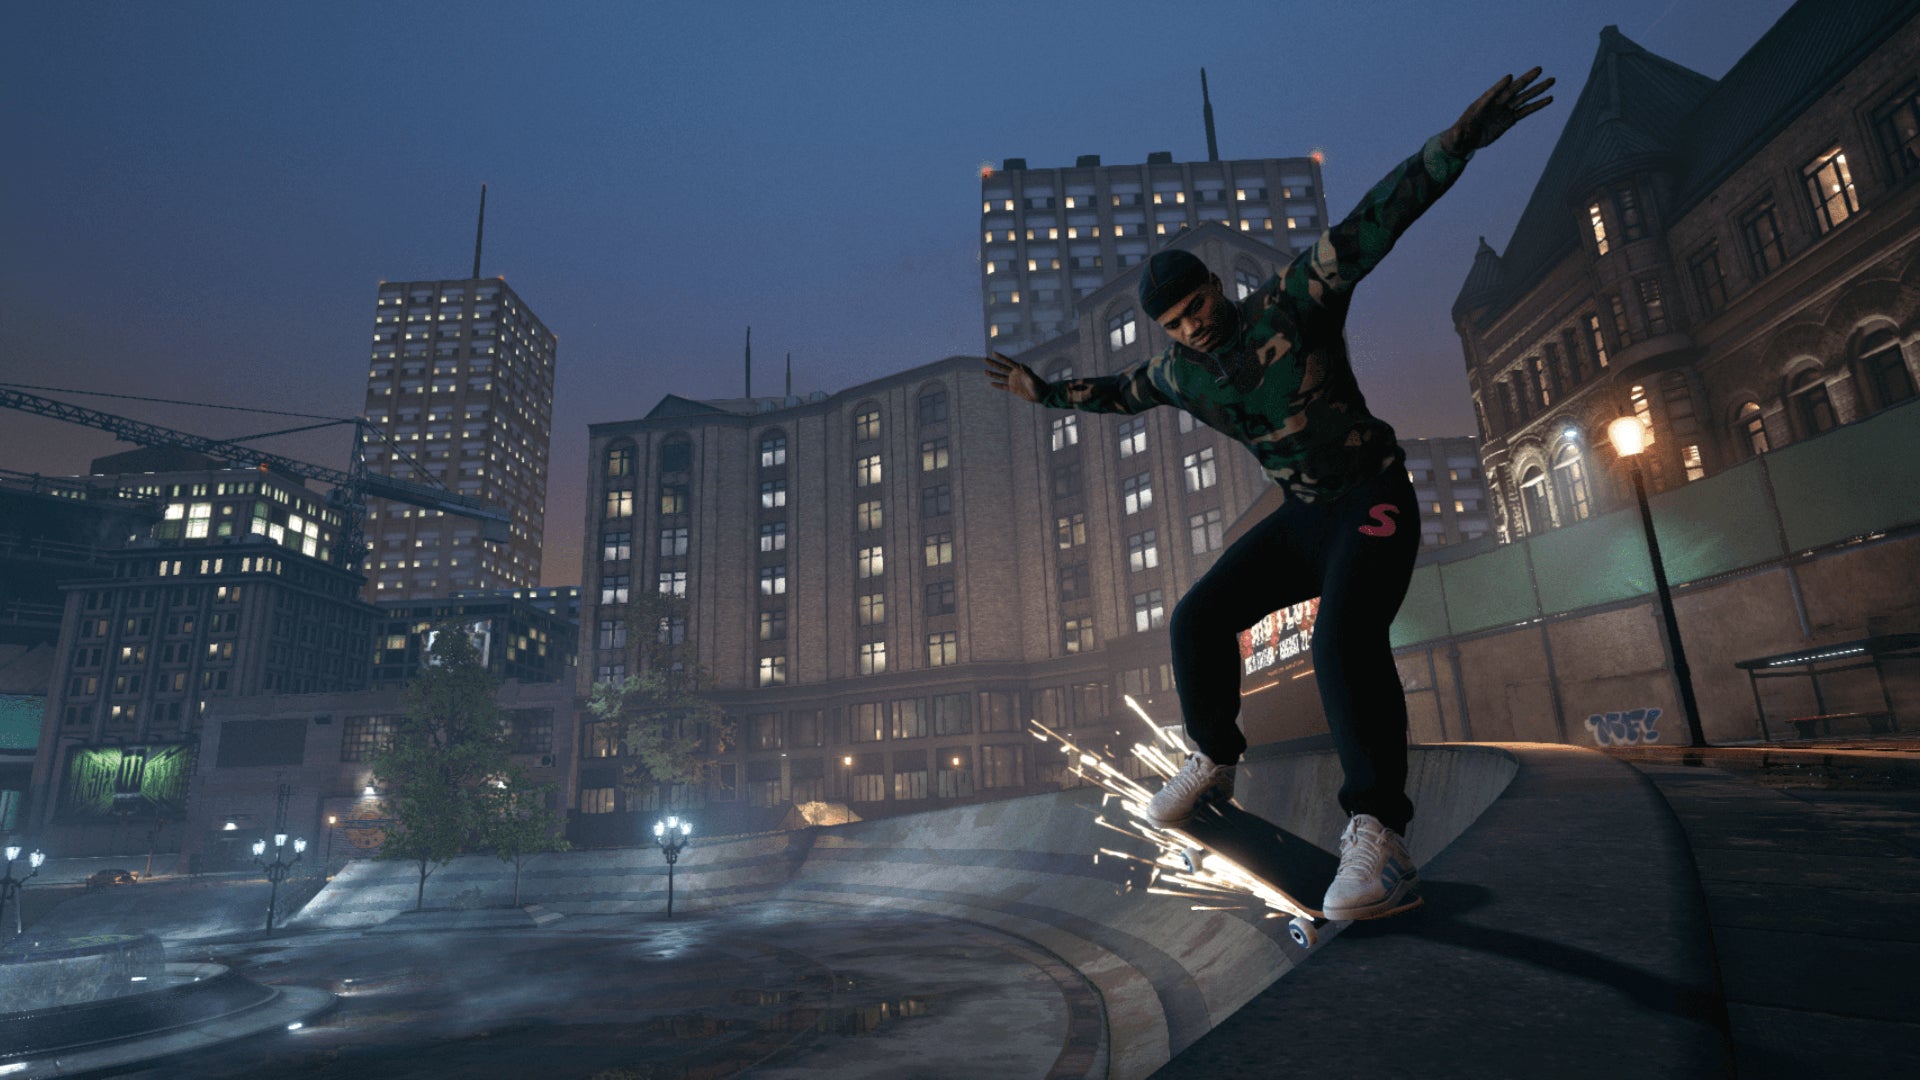 Image for Tony Hawk's Pro Skater 1 + 2 Is Getting 37 New Tracks, Missing Just a Few Originals